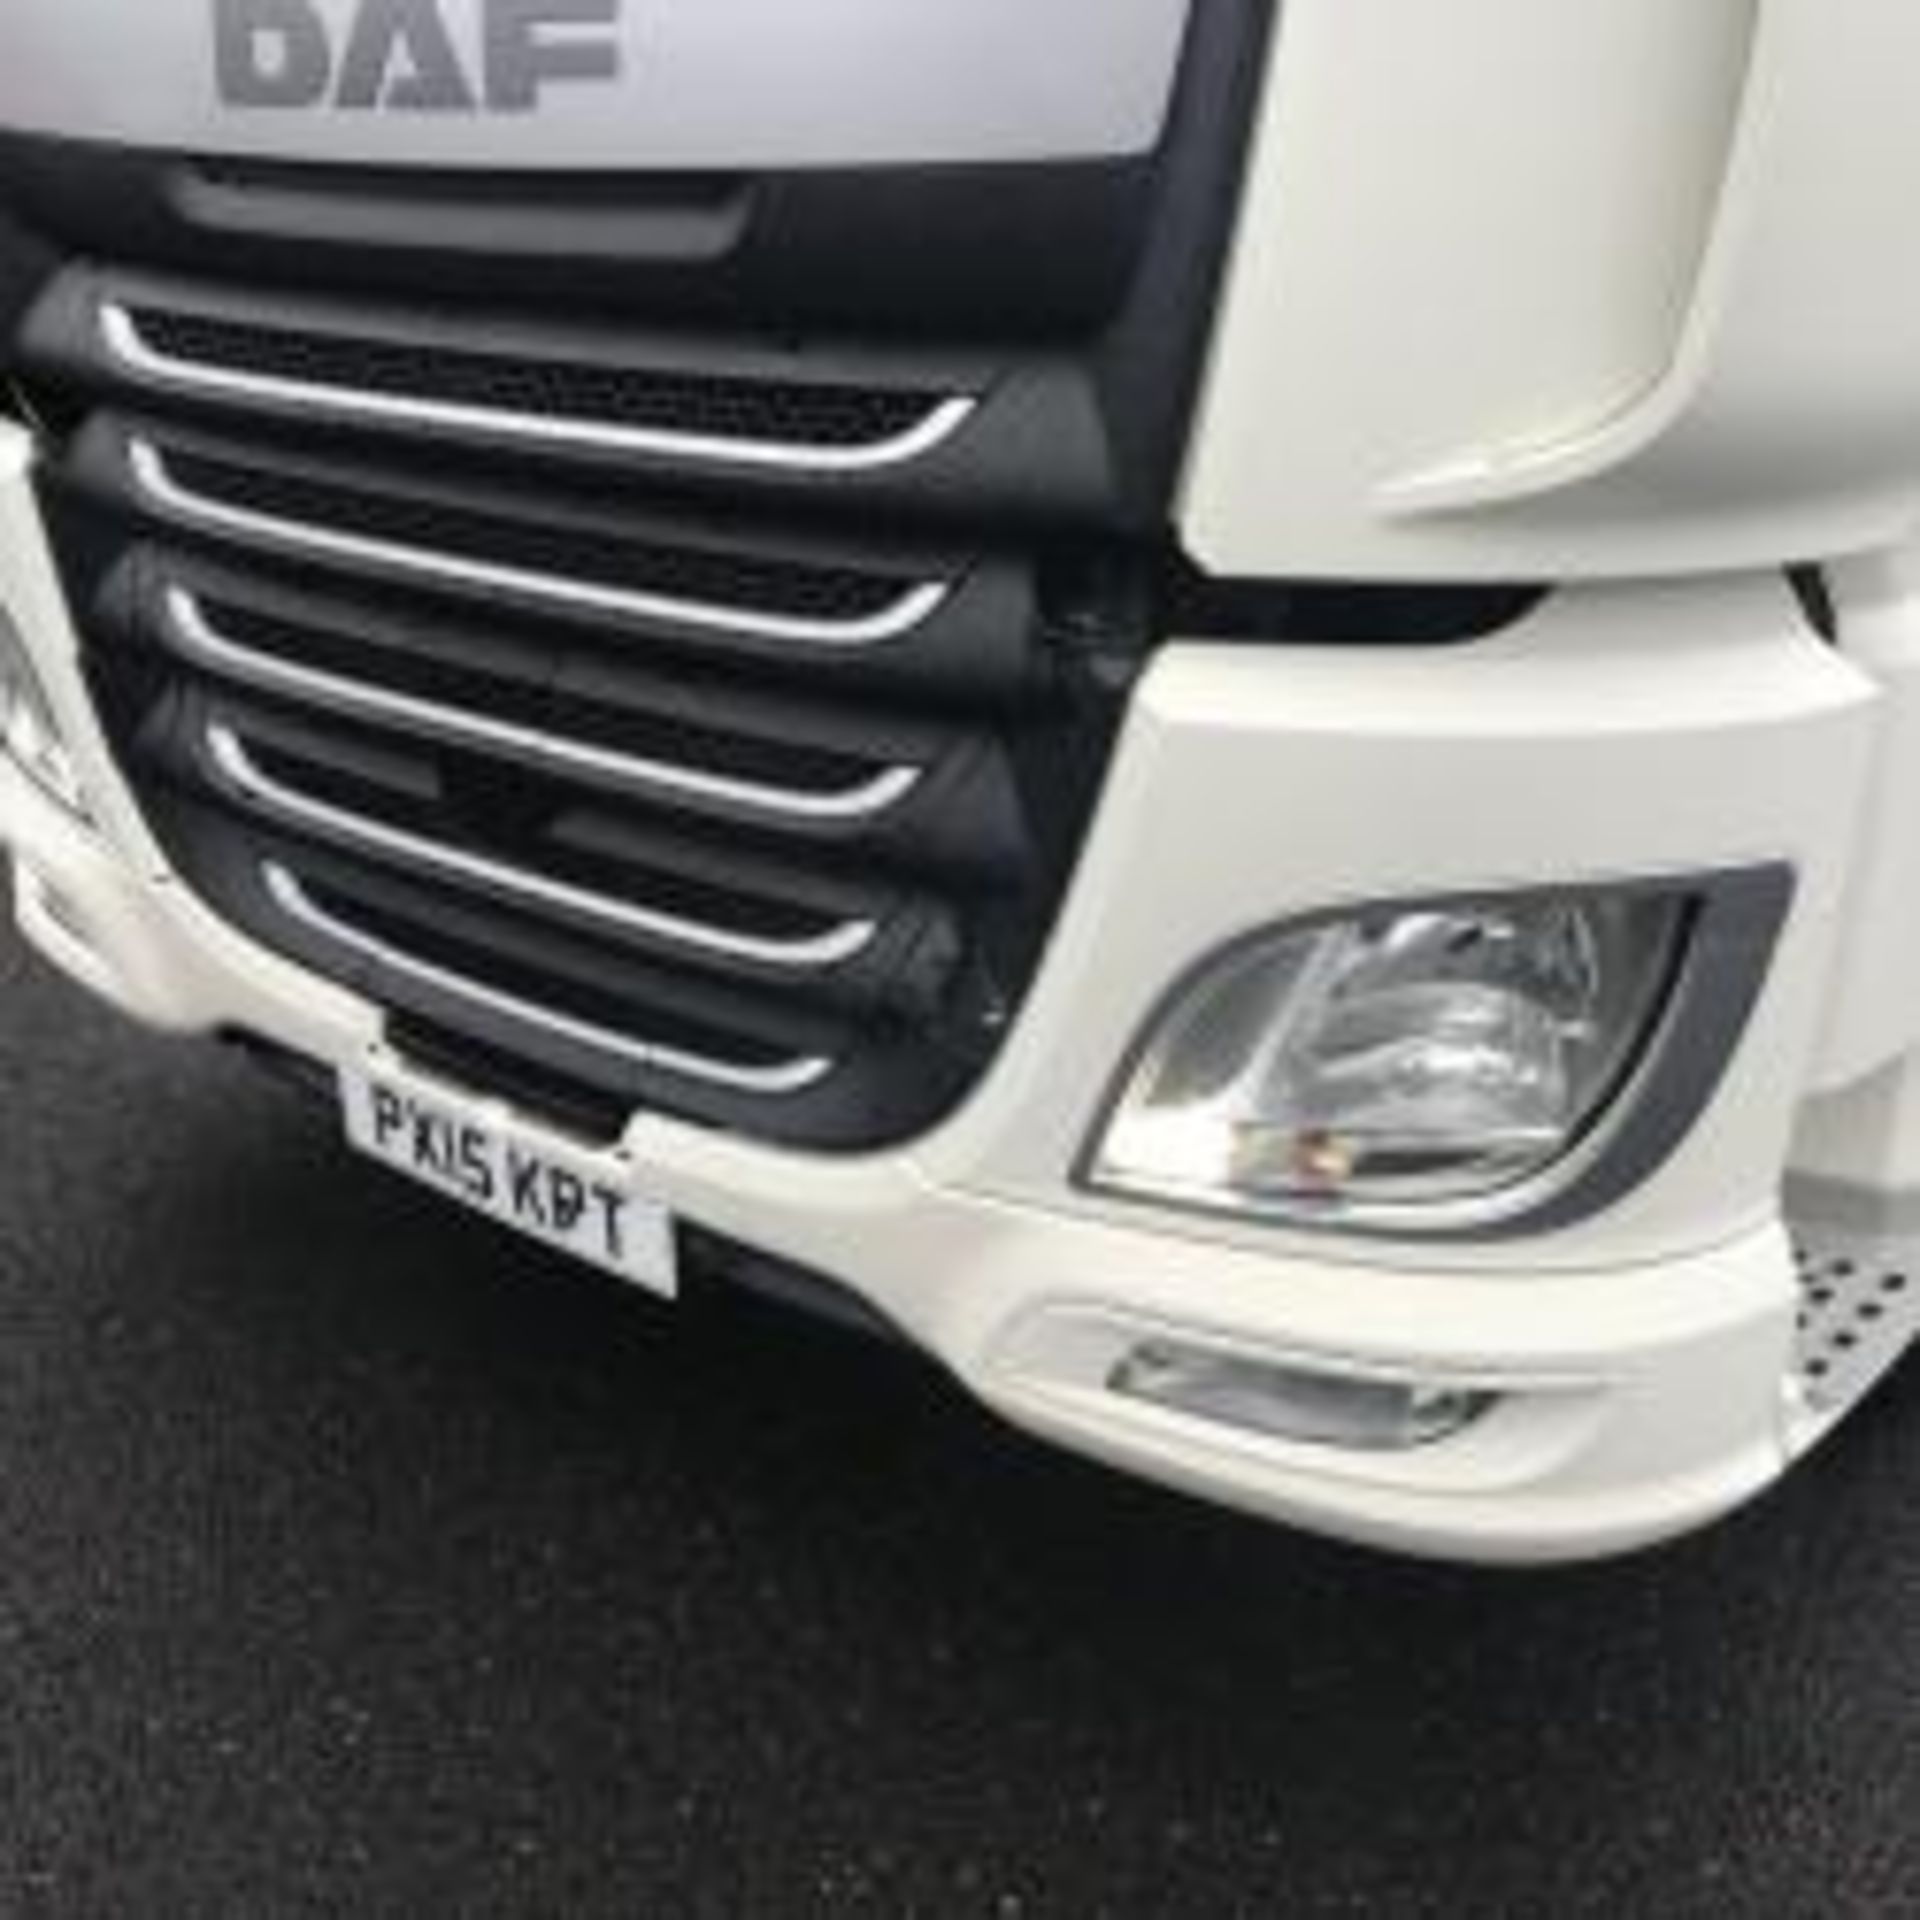 2015 DAF XF 106.460 6X2 TRACTOR, MANUAL GEARBOX, AIR CONDITIONING, TWIN BUNKS *PLUS VAT* - Image 7 of 18